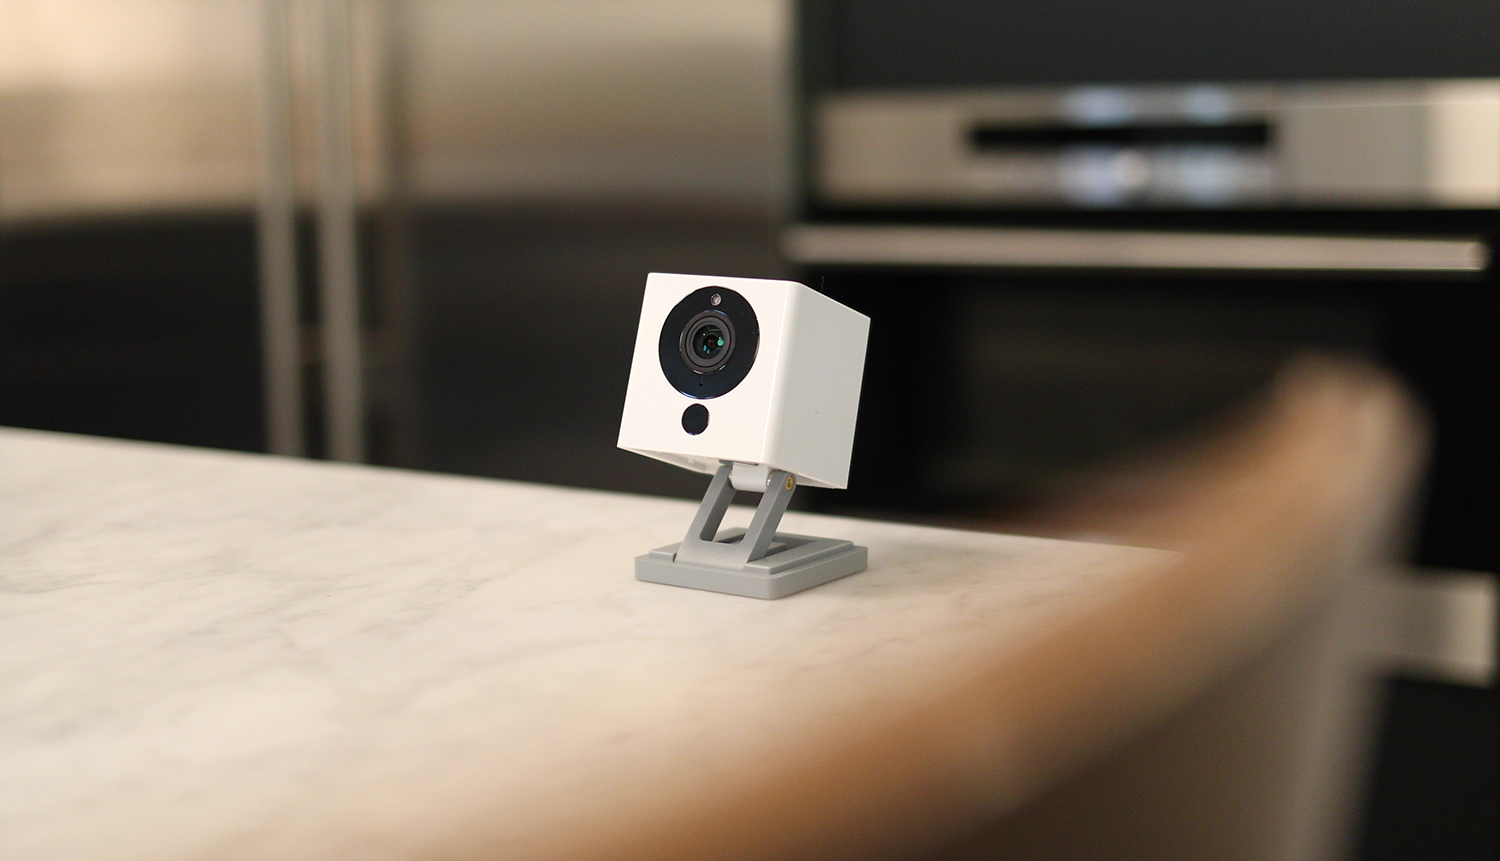 56 HQ Pictures Home Camera App Amazon - Best Home Security Cameras for 2020 | SafeWise